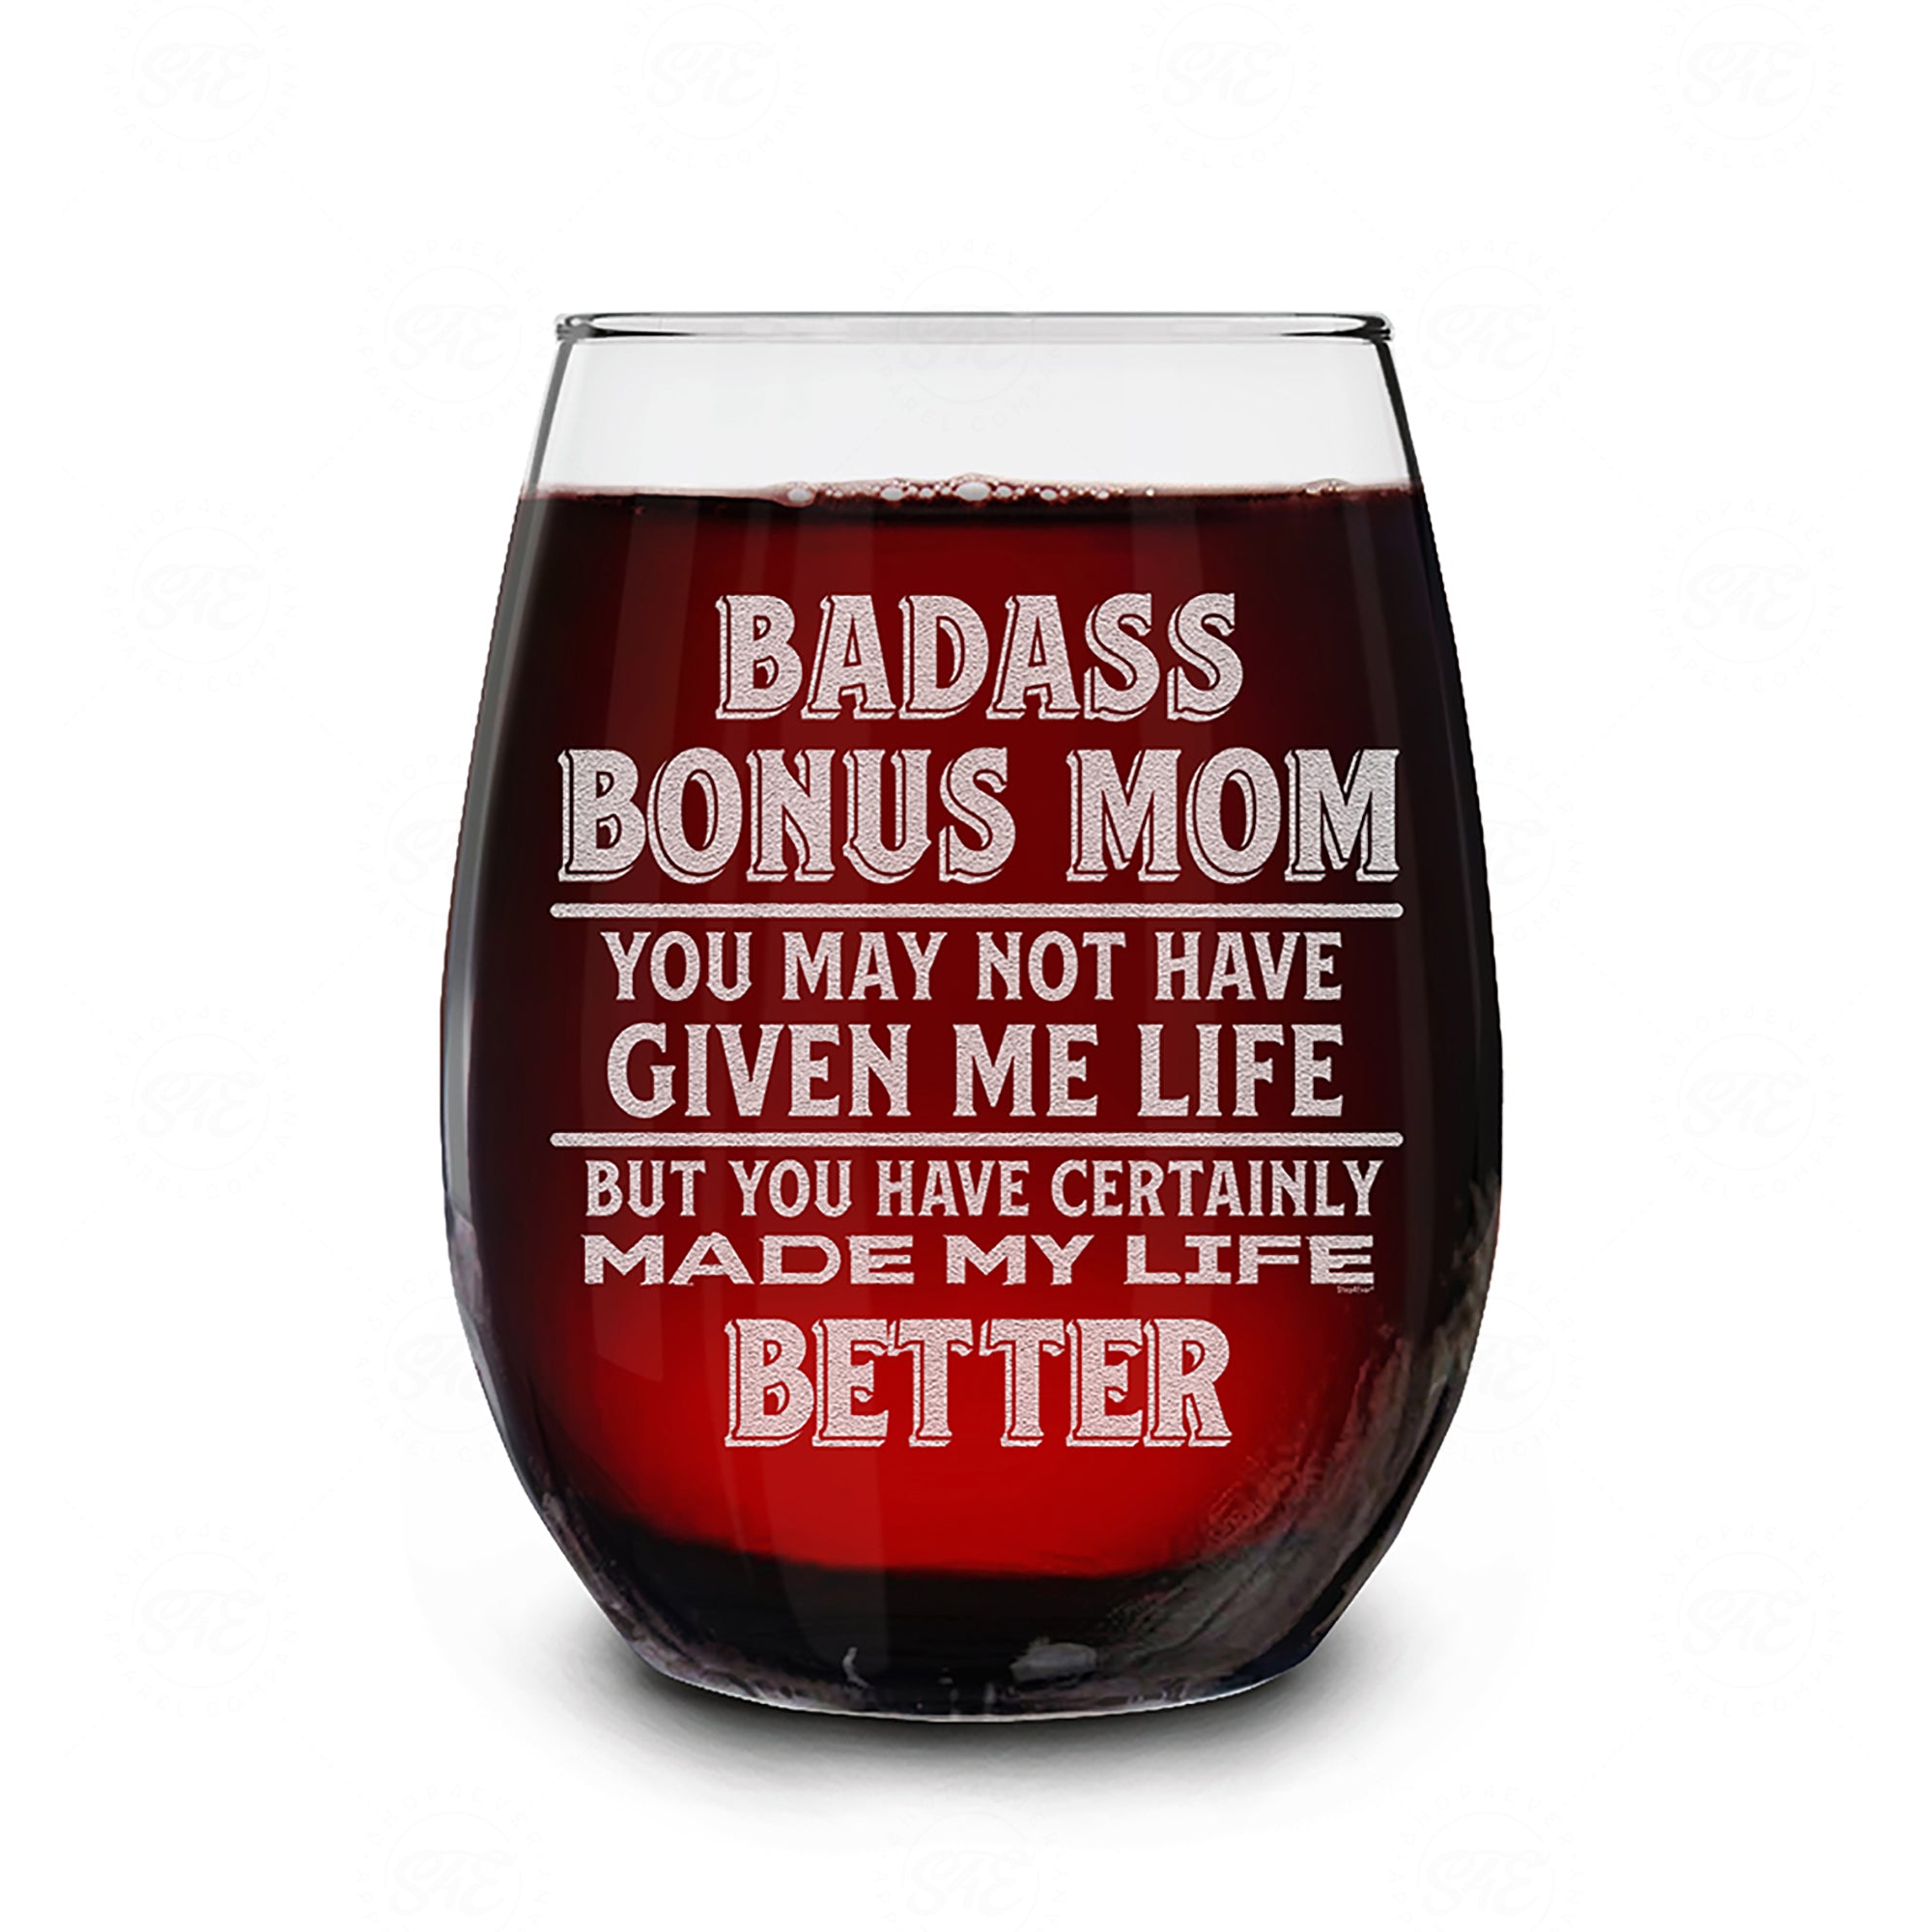 Bonus Mom You May Not Have Given Me Life But You Certainly Made My Life Better Engraved Stemless Wine Glass Mother's Day Gift for Stepmom